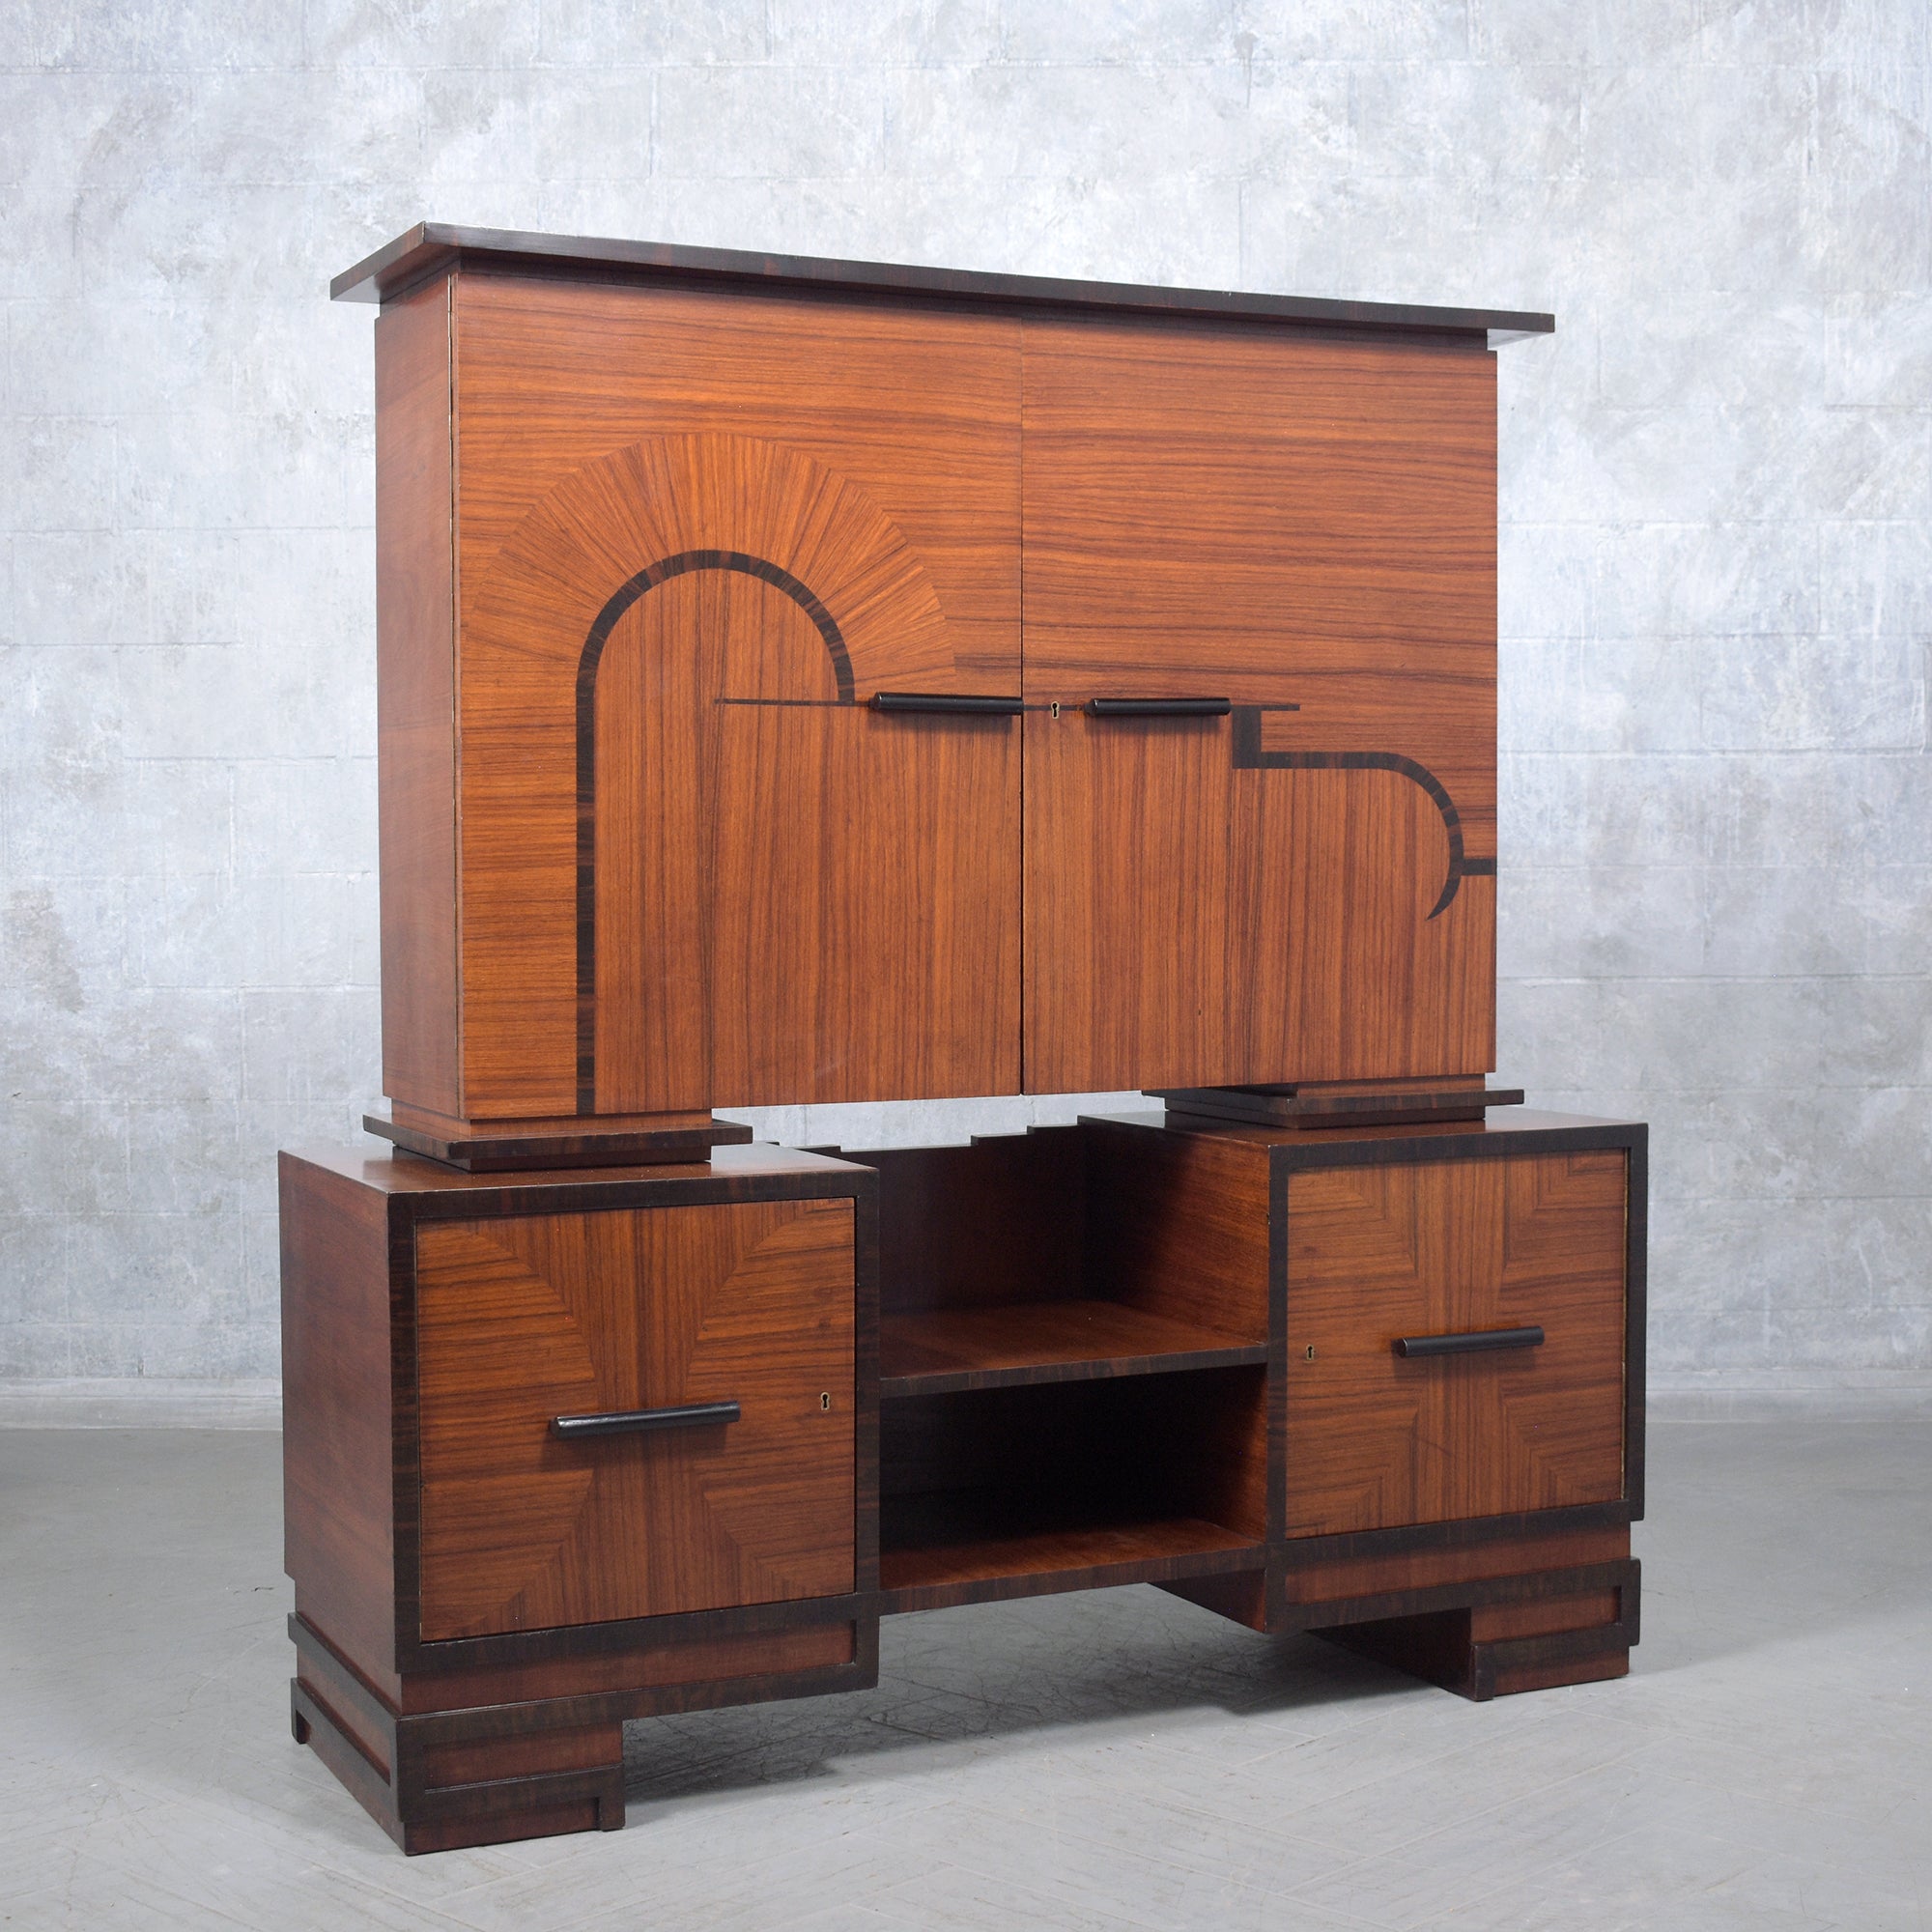 Experience the refined elegance of our 1950s French Art Deco Sideboard Cabinet, inspired by the designs of Fritz Gross. This luxurious piece is crafted from a blend of mahogany, rosewood, and exotic veneers, and has been meticulously restored by our